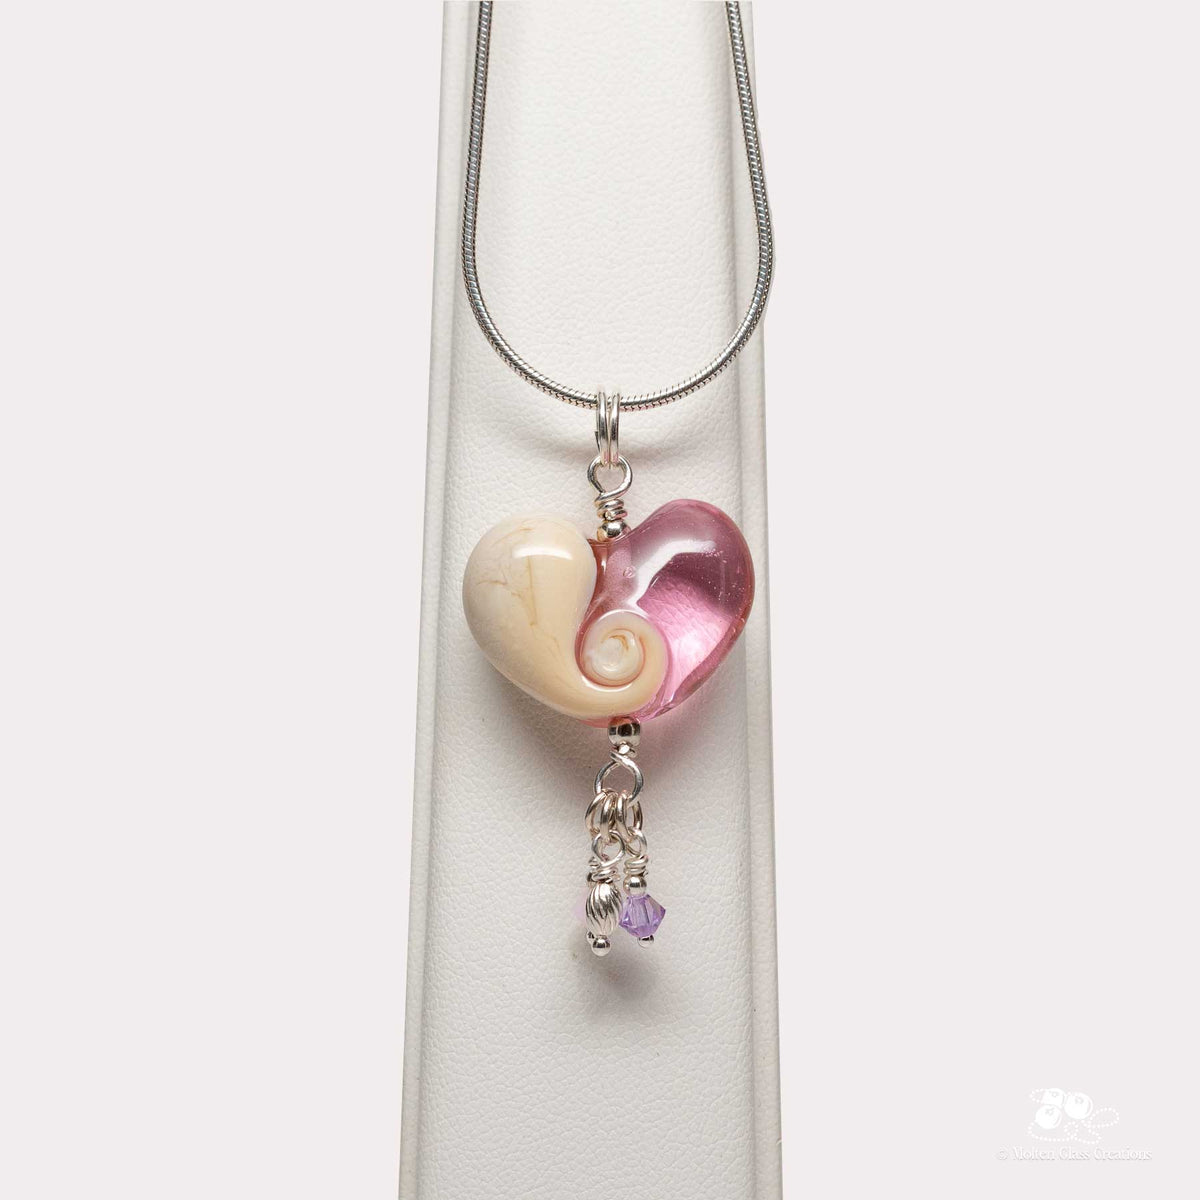 Pink and Ivory Swirl glass heart necklace